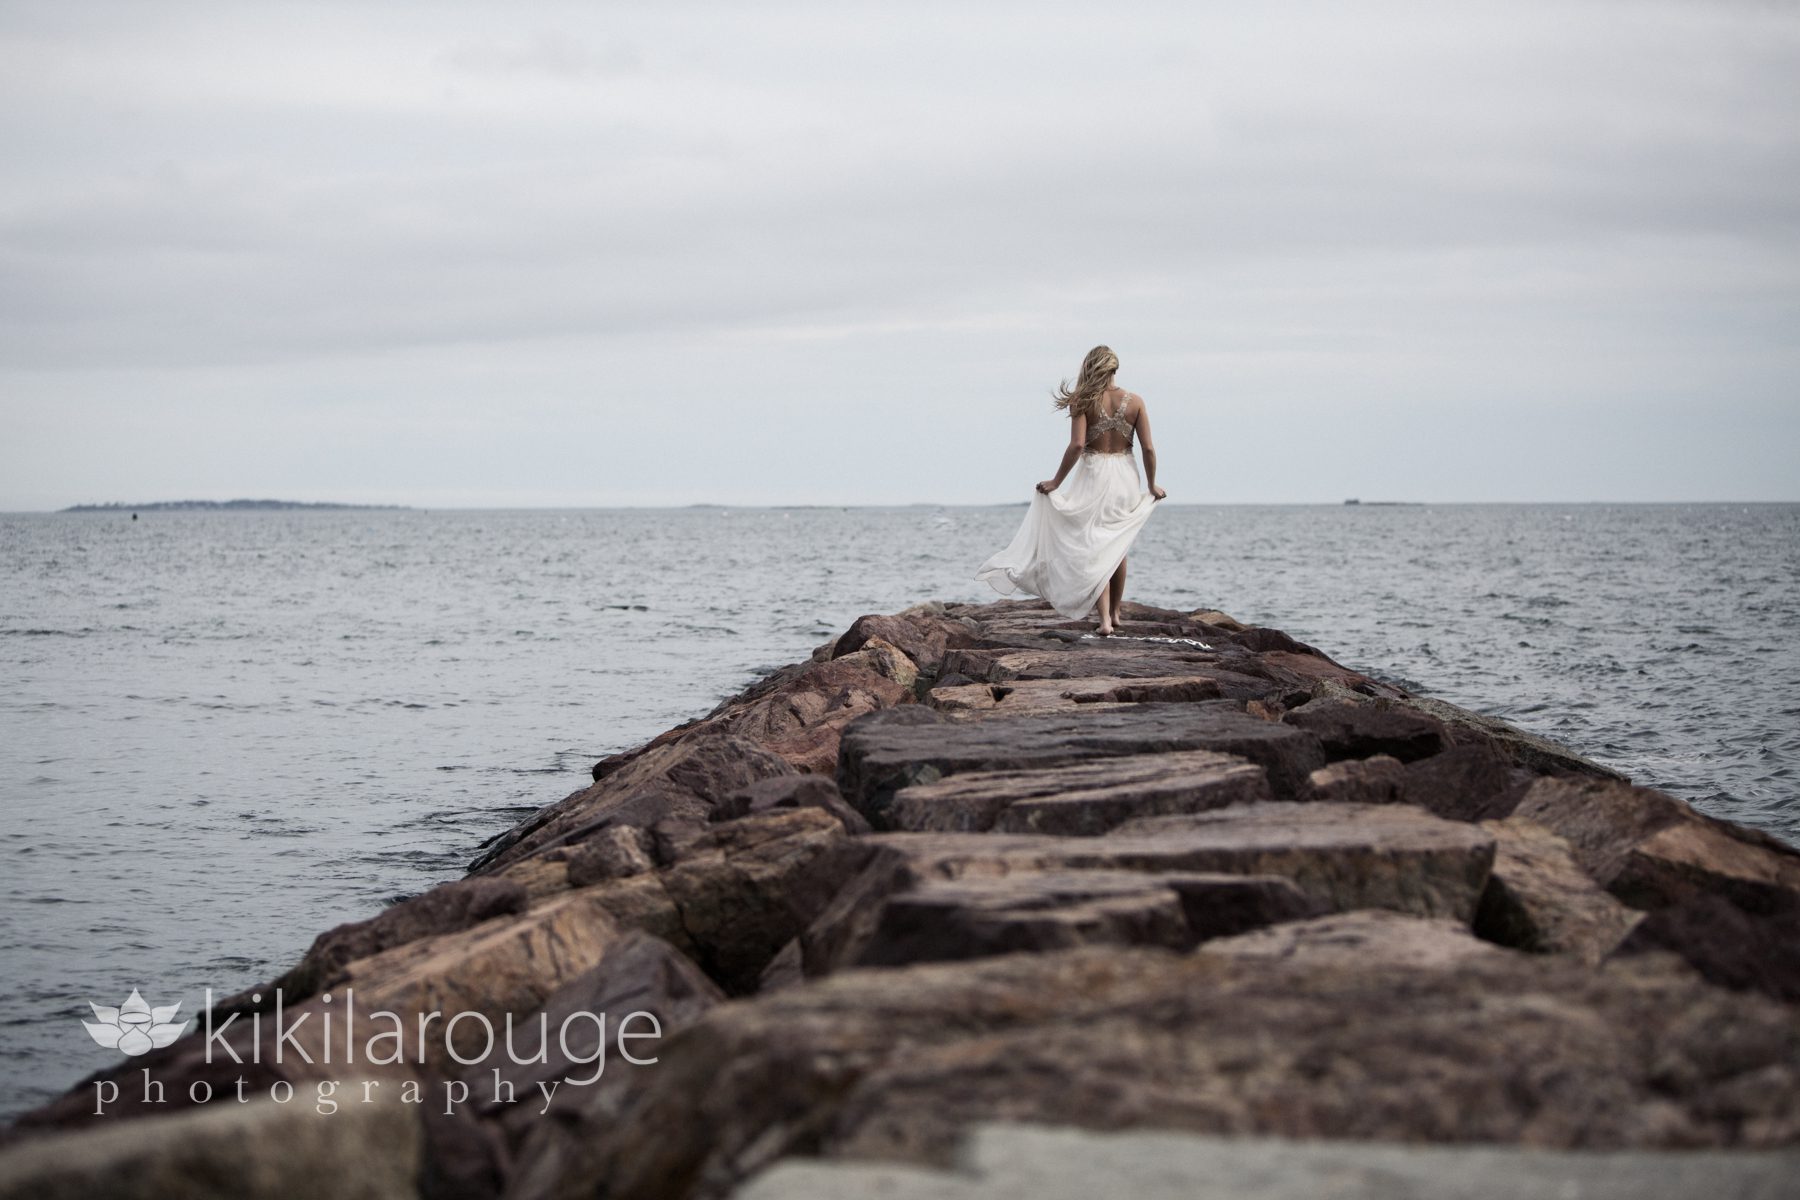 Girl walking away on jetty with prom dress